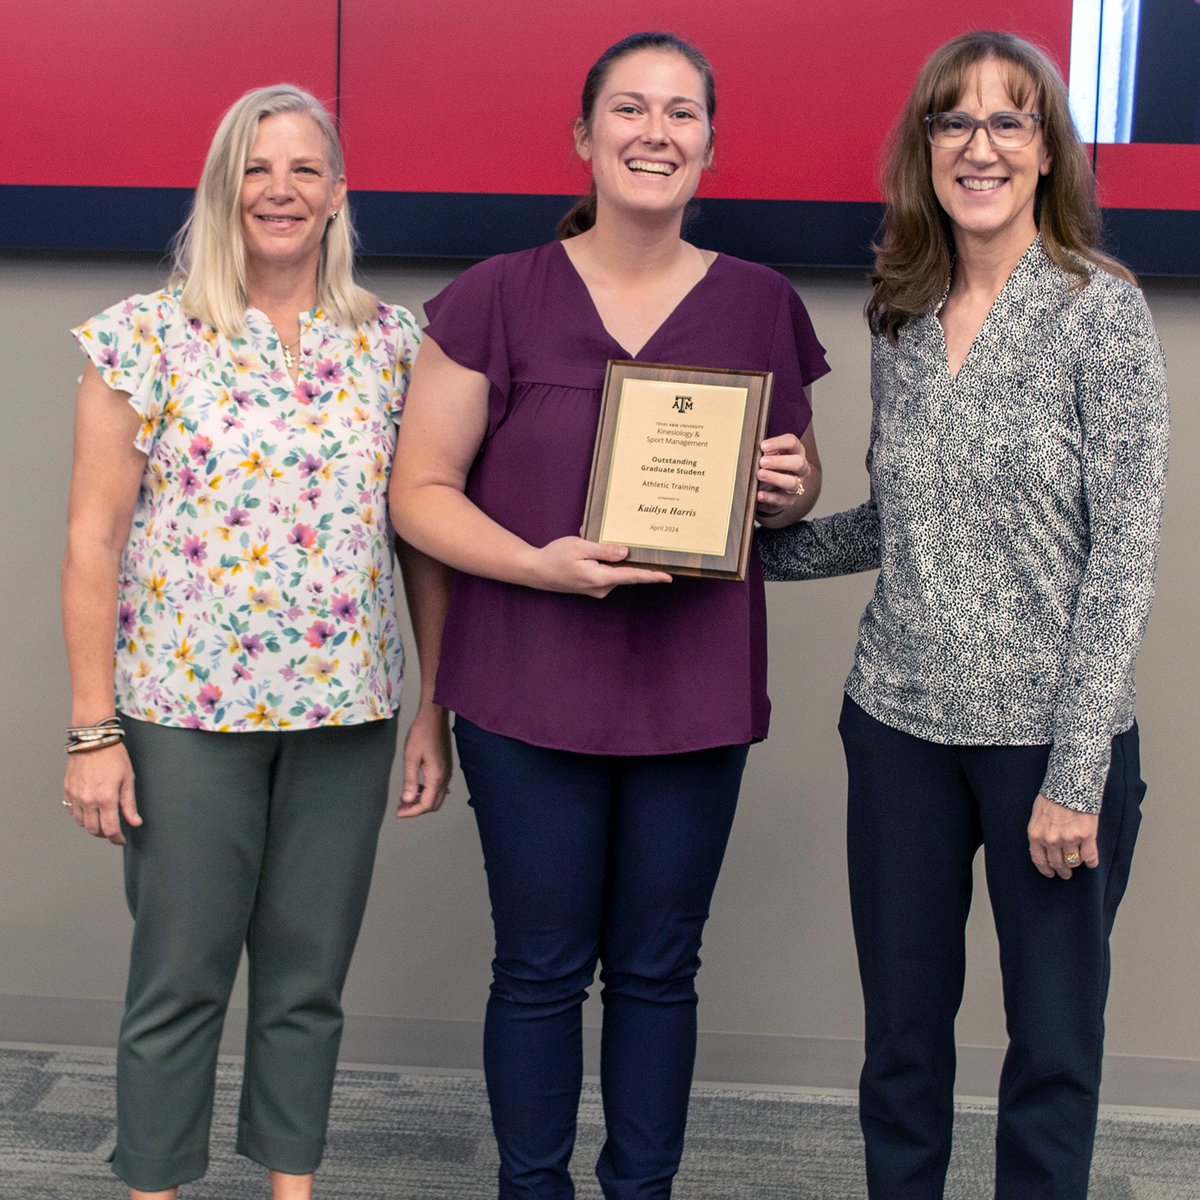 Kaitlynn Harris was named our Outstanding Graduate Student for her accomplishments in our Athletic Training program! 💪 🏅

#AthleticTraining #Awards #GradStudent #Students